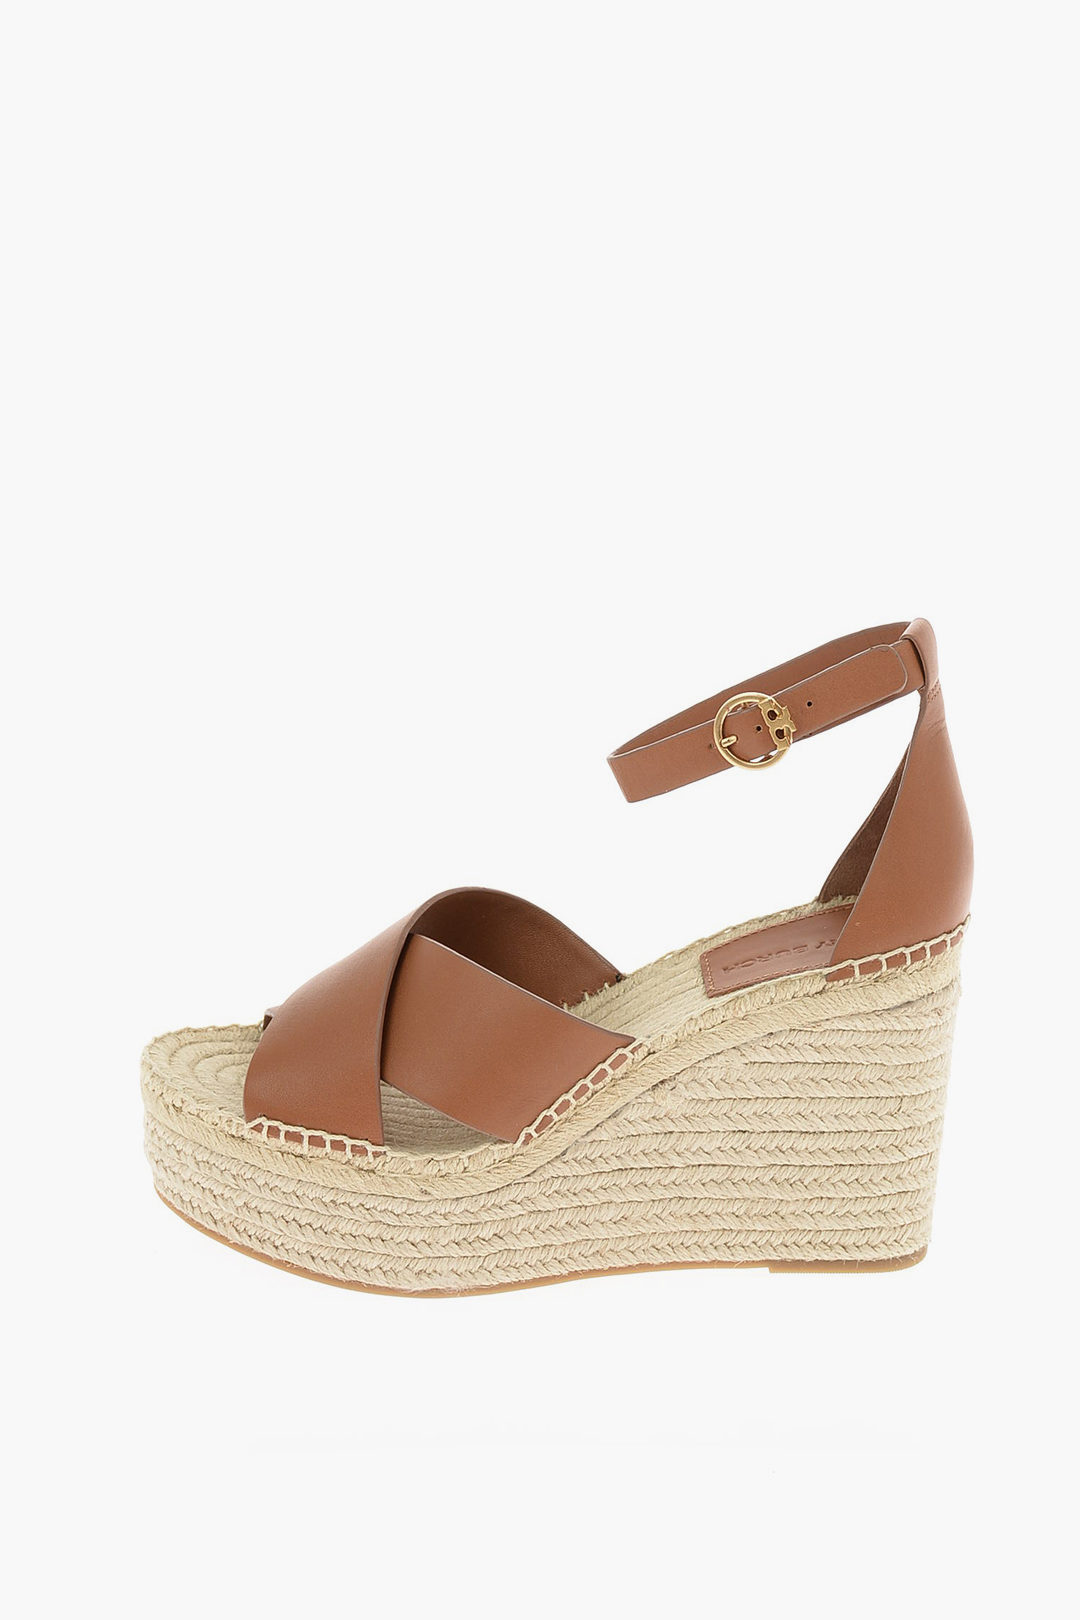 Tory Burch  cm leather SELBY Wedge espadrilles women - Glamood Outlet